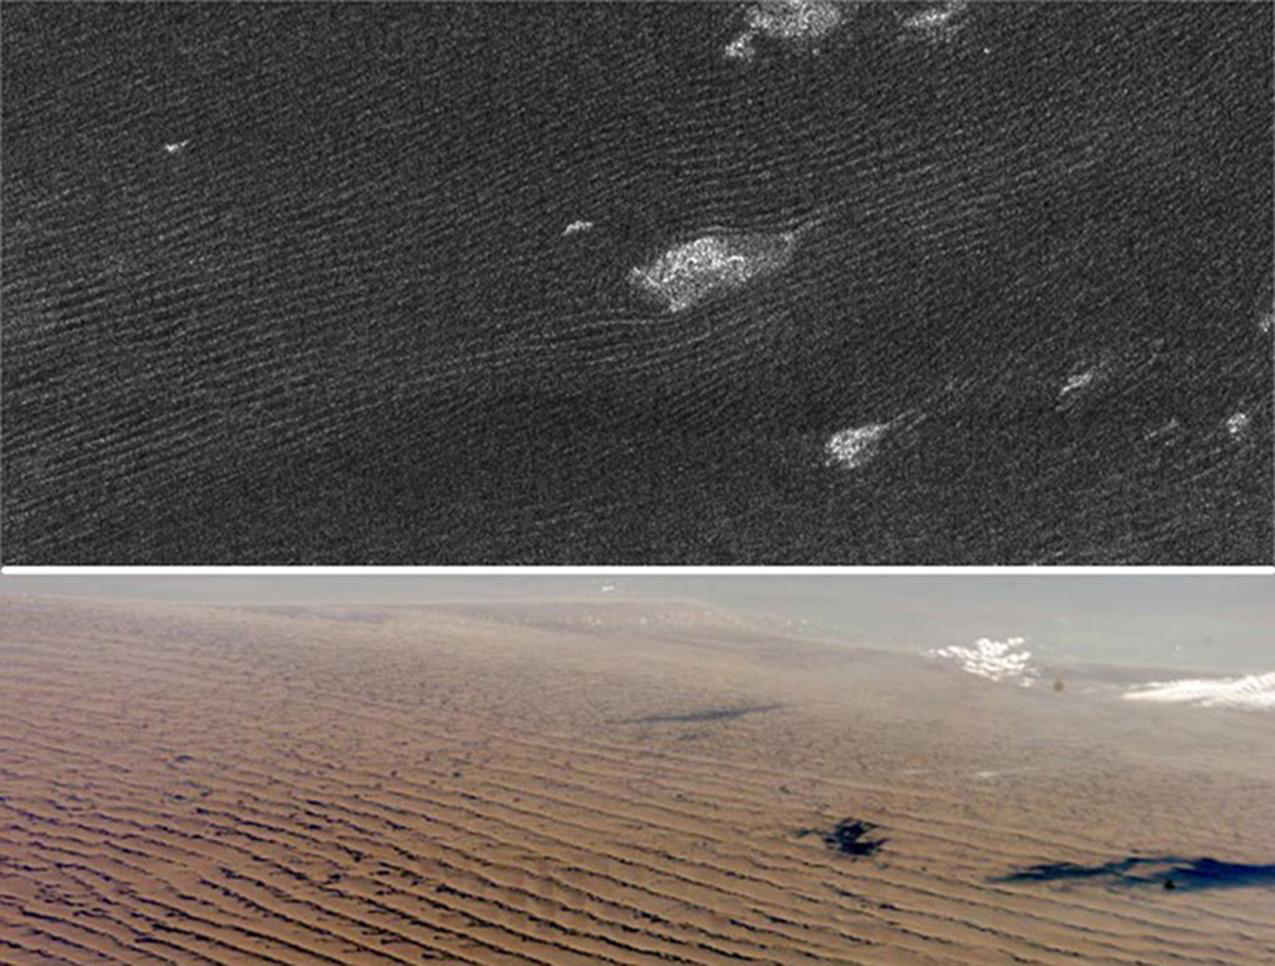 Cassini radar sees sand dunes on Saturn's giant moon Titan (upper photo) that are sculpted like Namibian sand dunes on Earth (lower photo).